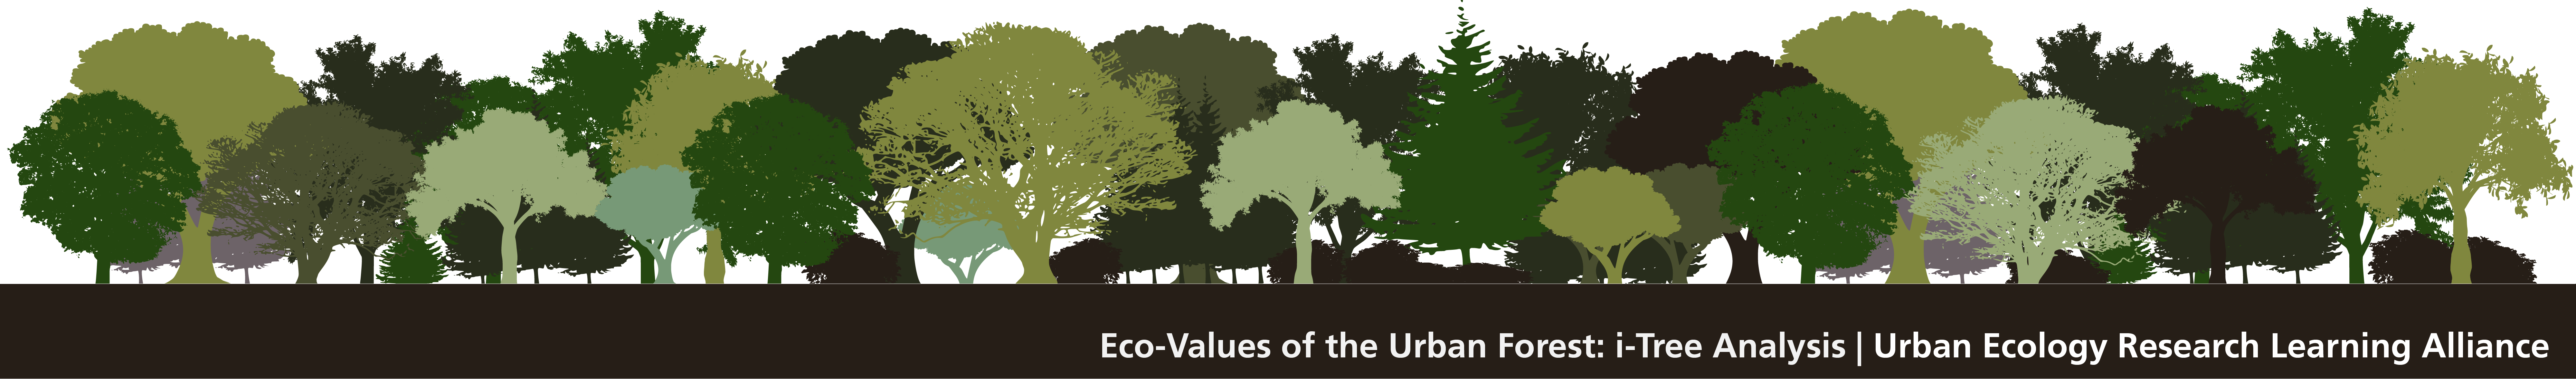 Eco-Values of the Urban Forest: i-Tree Analysis